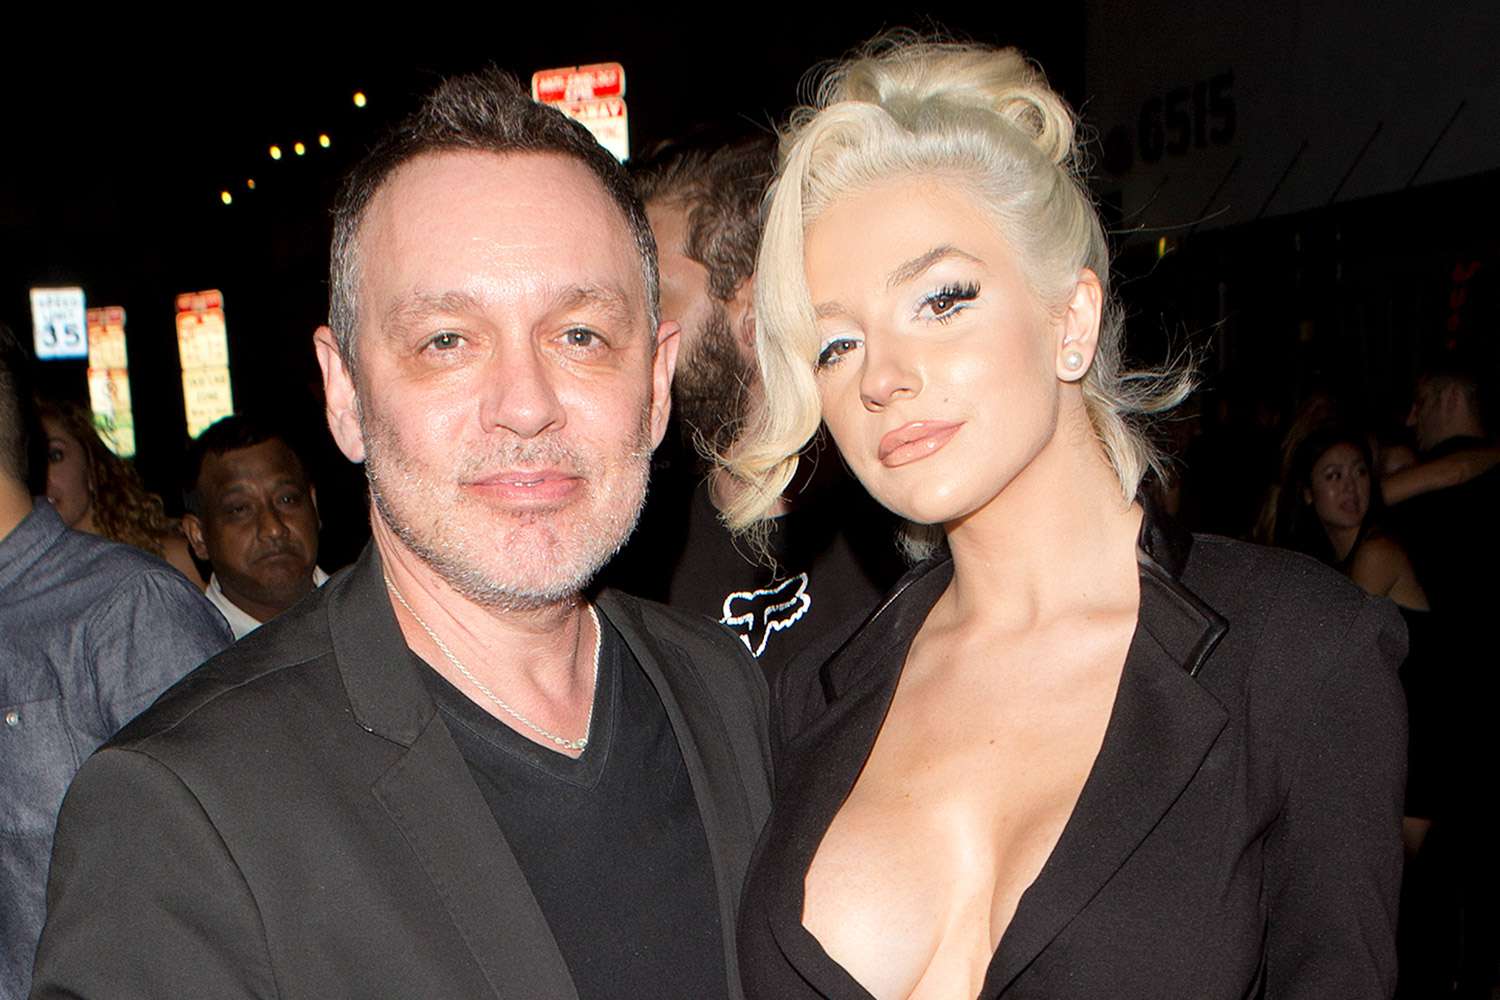 Courtney Stodden Had to ‘Relive’ Doug Hutchison’s Alleged Grooming for New Book